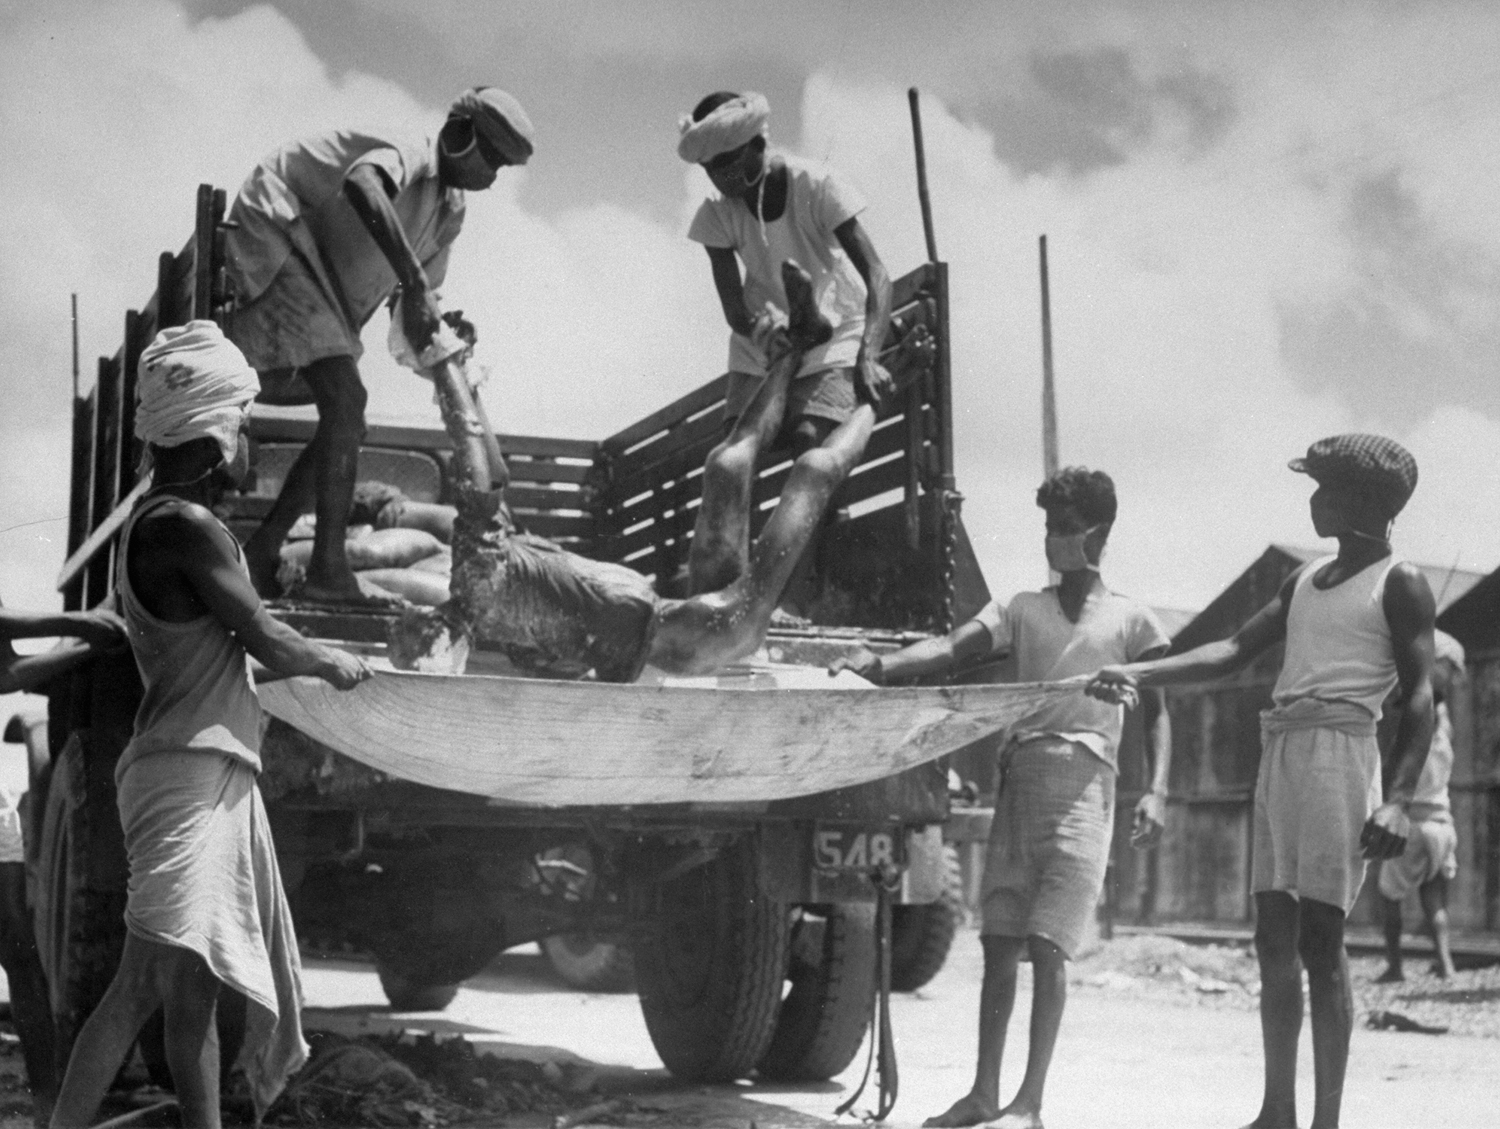 Men unload corpses from a truck in preparation for cremation after bloody rioting between Hindus and Muslims, Calcutta (now Kolkata), India, 1946.